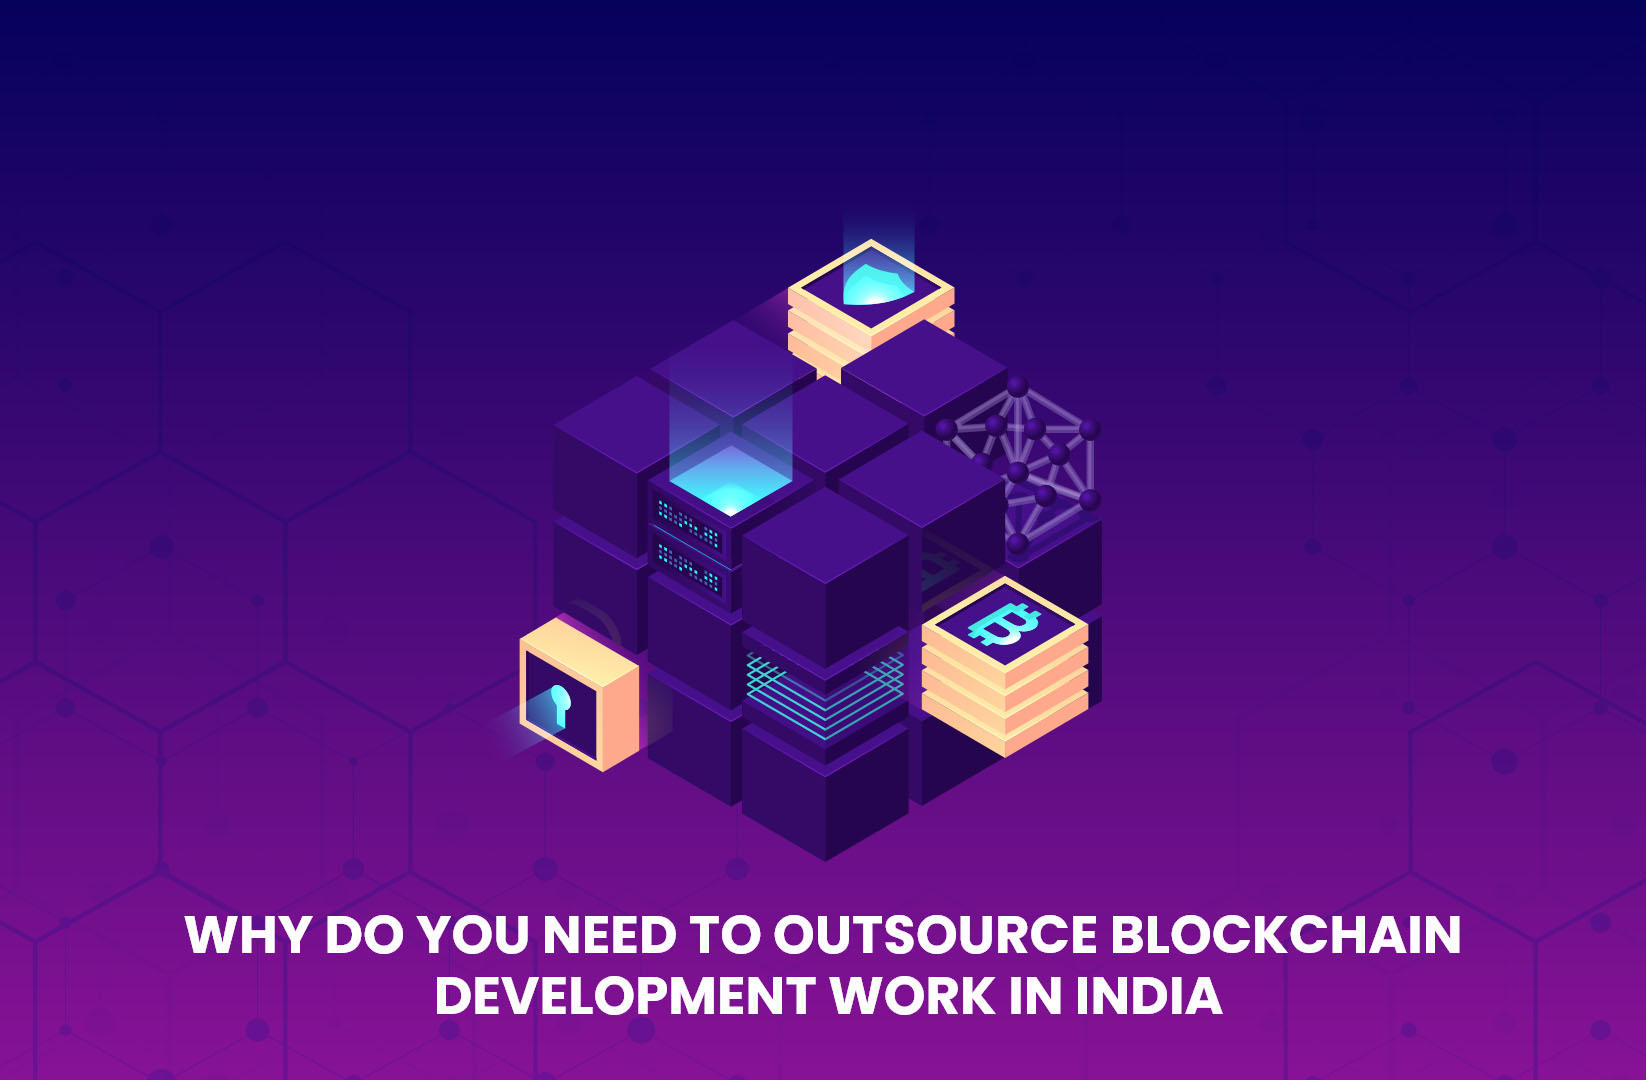 Why do you need to outsource blockchain development work in India? 